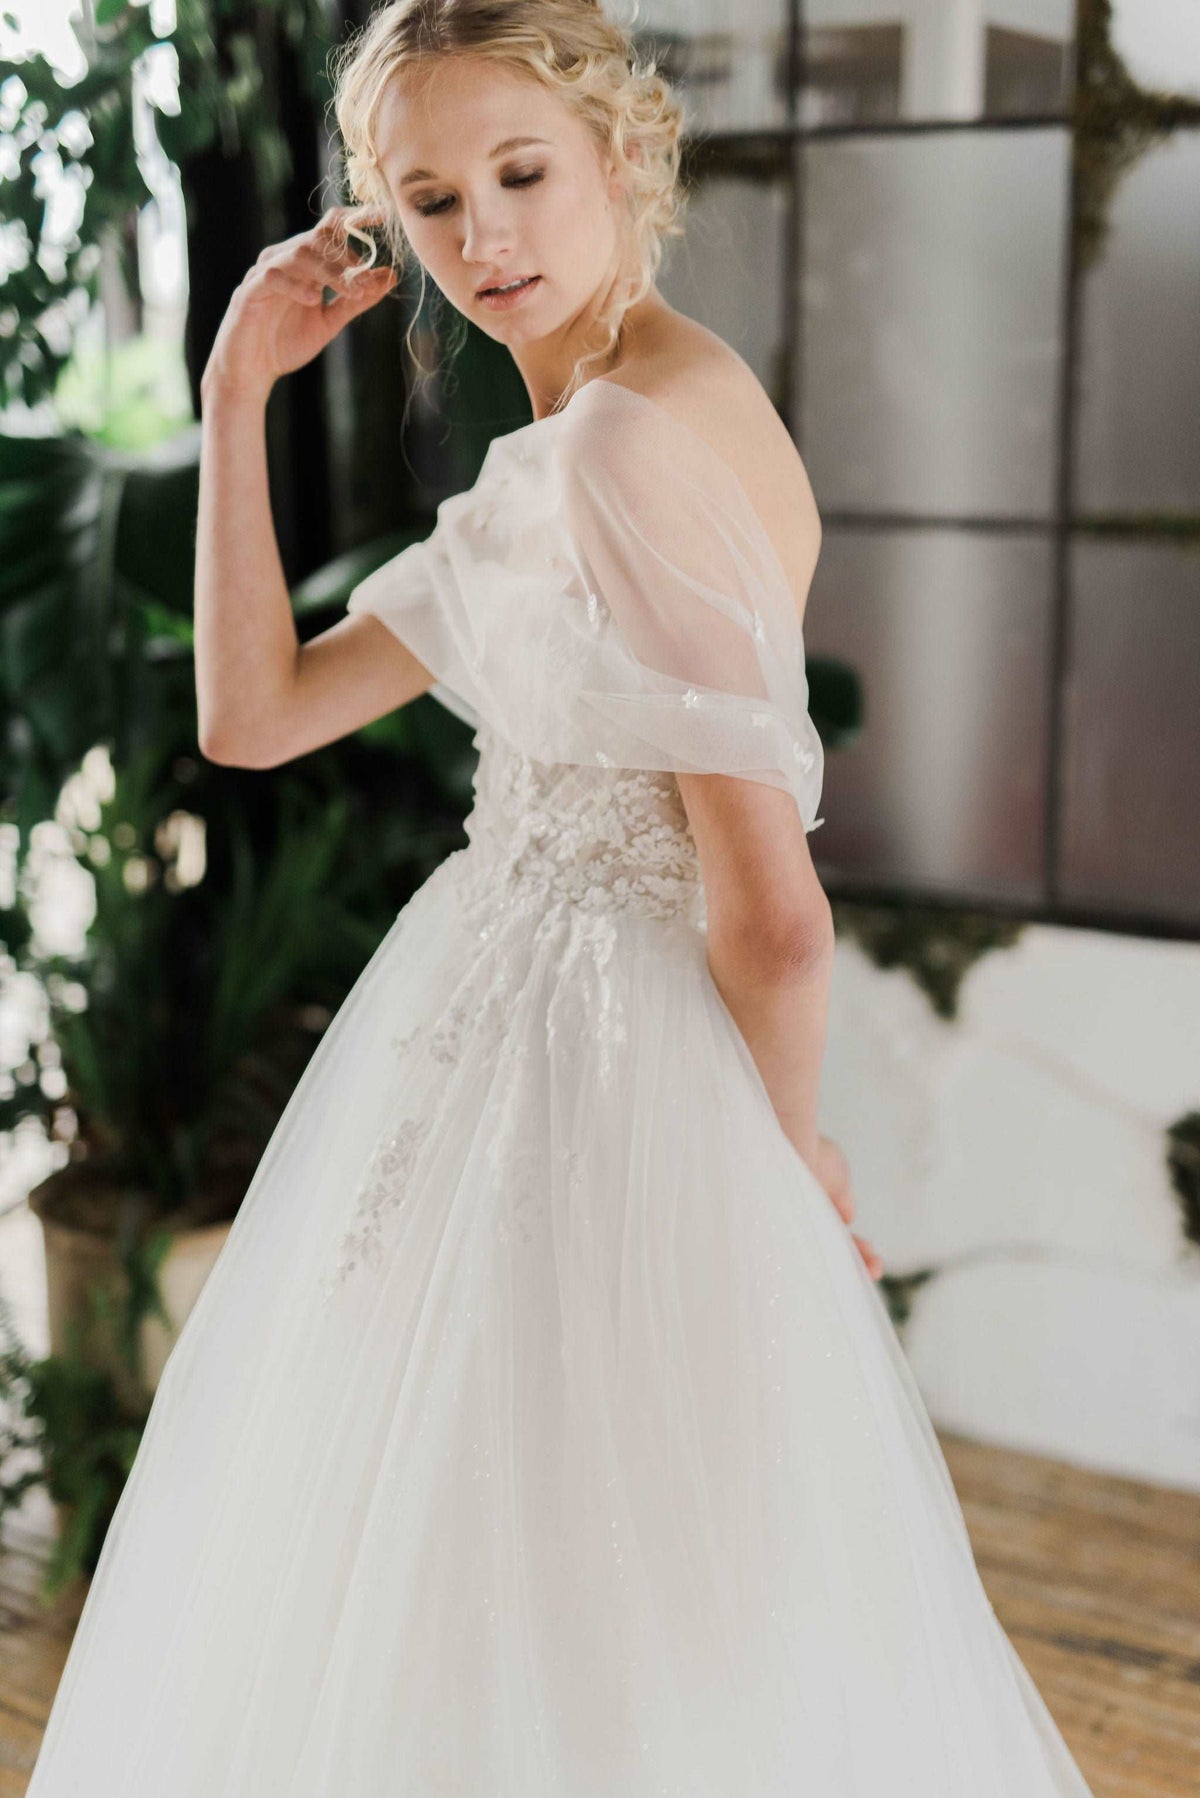 Be a modern princess in the beaded tulle Destiny wedding dress. Couture bespoke wedding gowns handmade in Canada by Catherine Langlois bridal. Visit our Toronto bridal boutique for your personalized wedding dress.